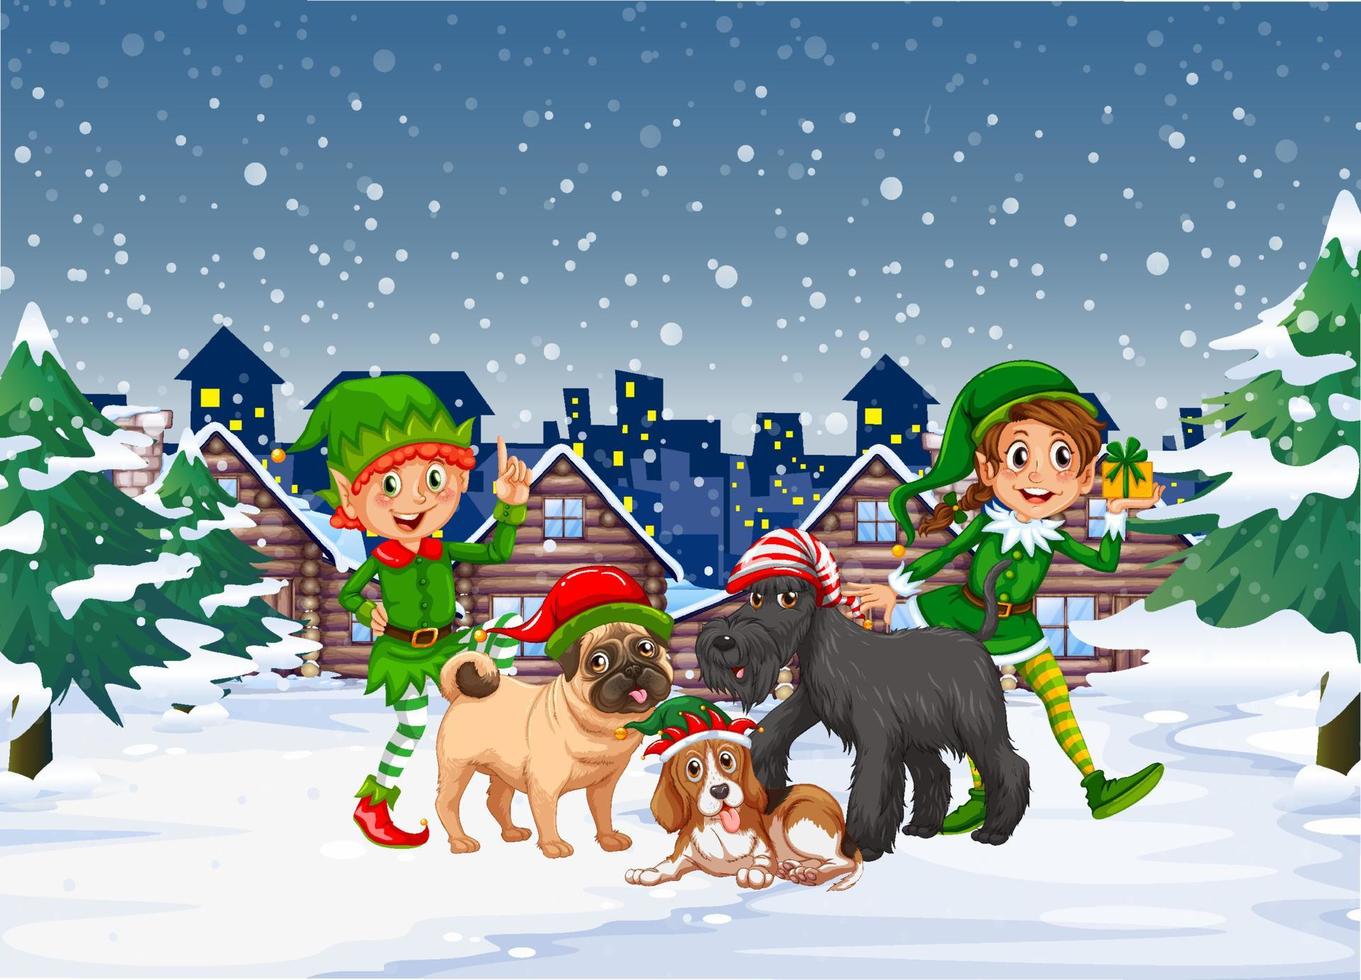 Snowy christmas night scene with elves and dogs vector